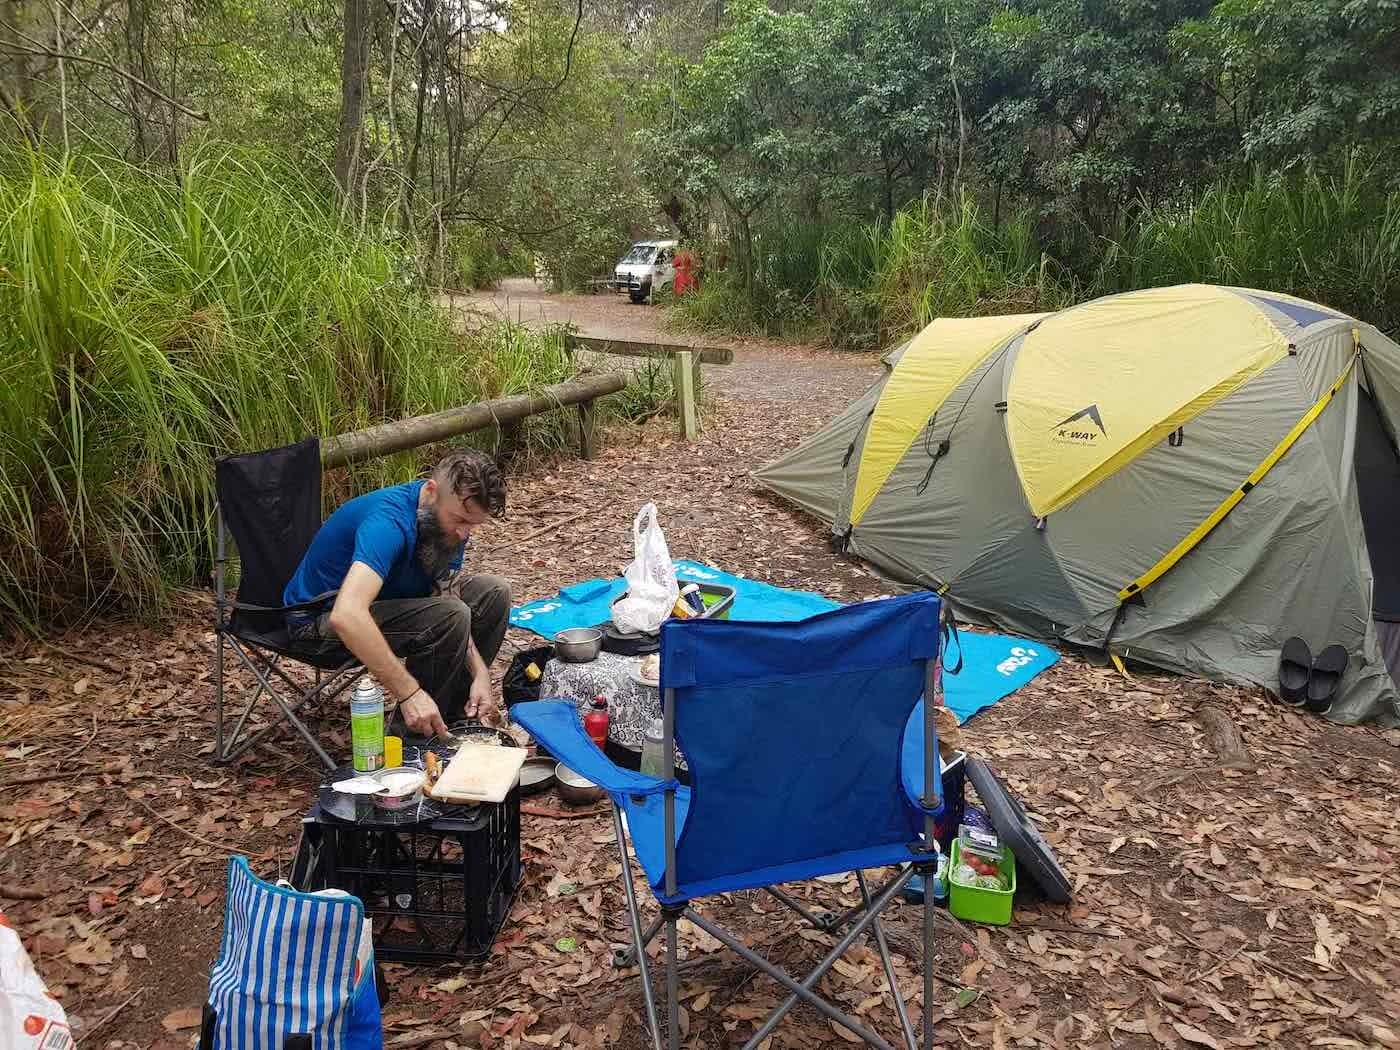 Renew Your Vows with the South Coast // Honeymoon Bay (NSW), Dan Slater, campsite, camping, tent